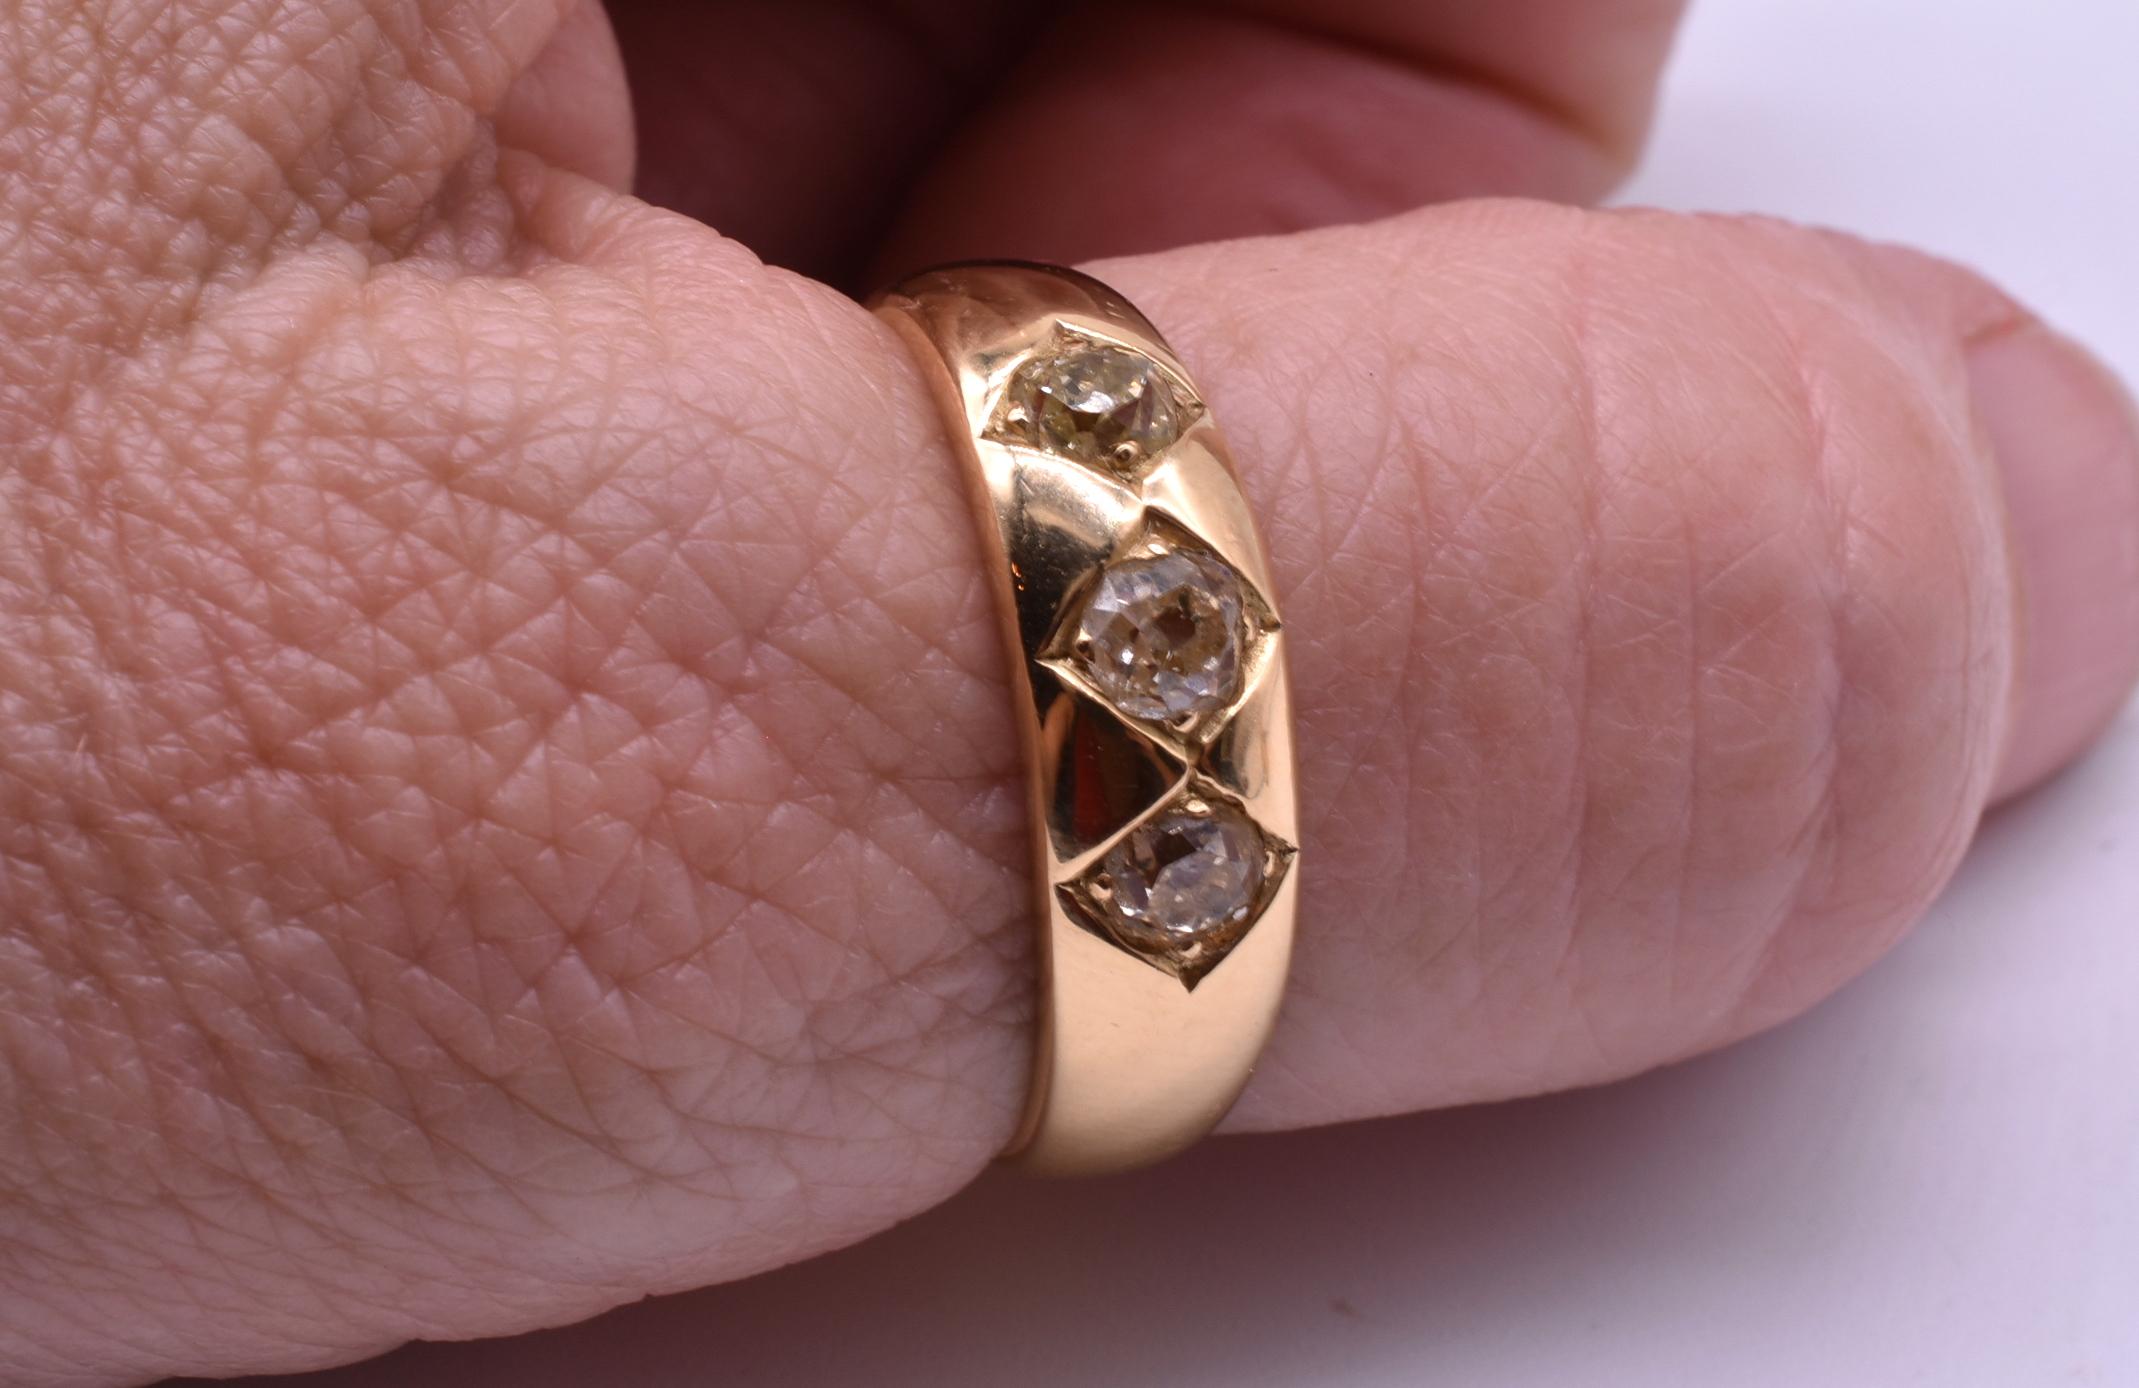 18K large size circa 1900 gypsy ring is a lovely with 3 old mine cut diamonds securely held into etched diamond shapes. Gypsy rings were made with the gemstones set flush with the gold band and is one of the most secure ways to set a ring. Worn by